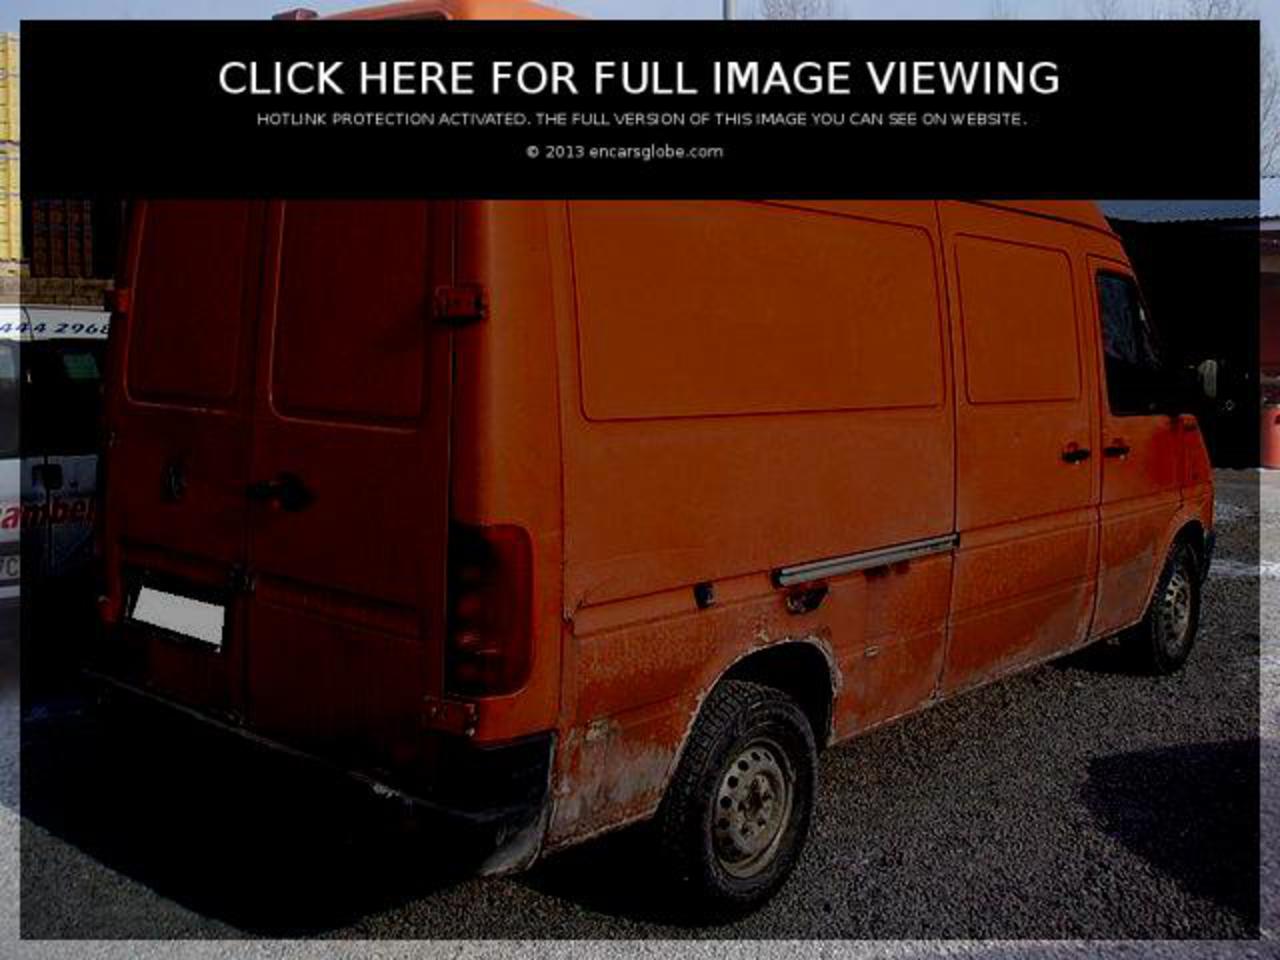 Volkswagen LT 35 Combi Photo Gallery: Photo #11 out of 9, Image ...